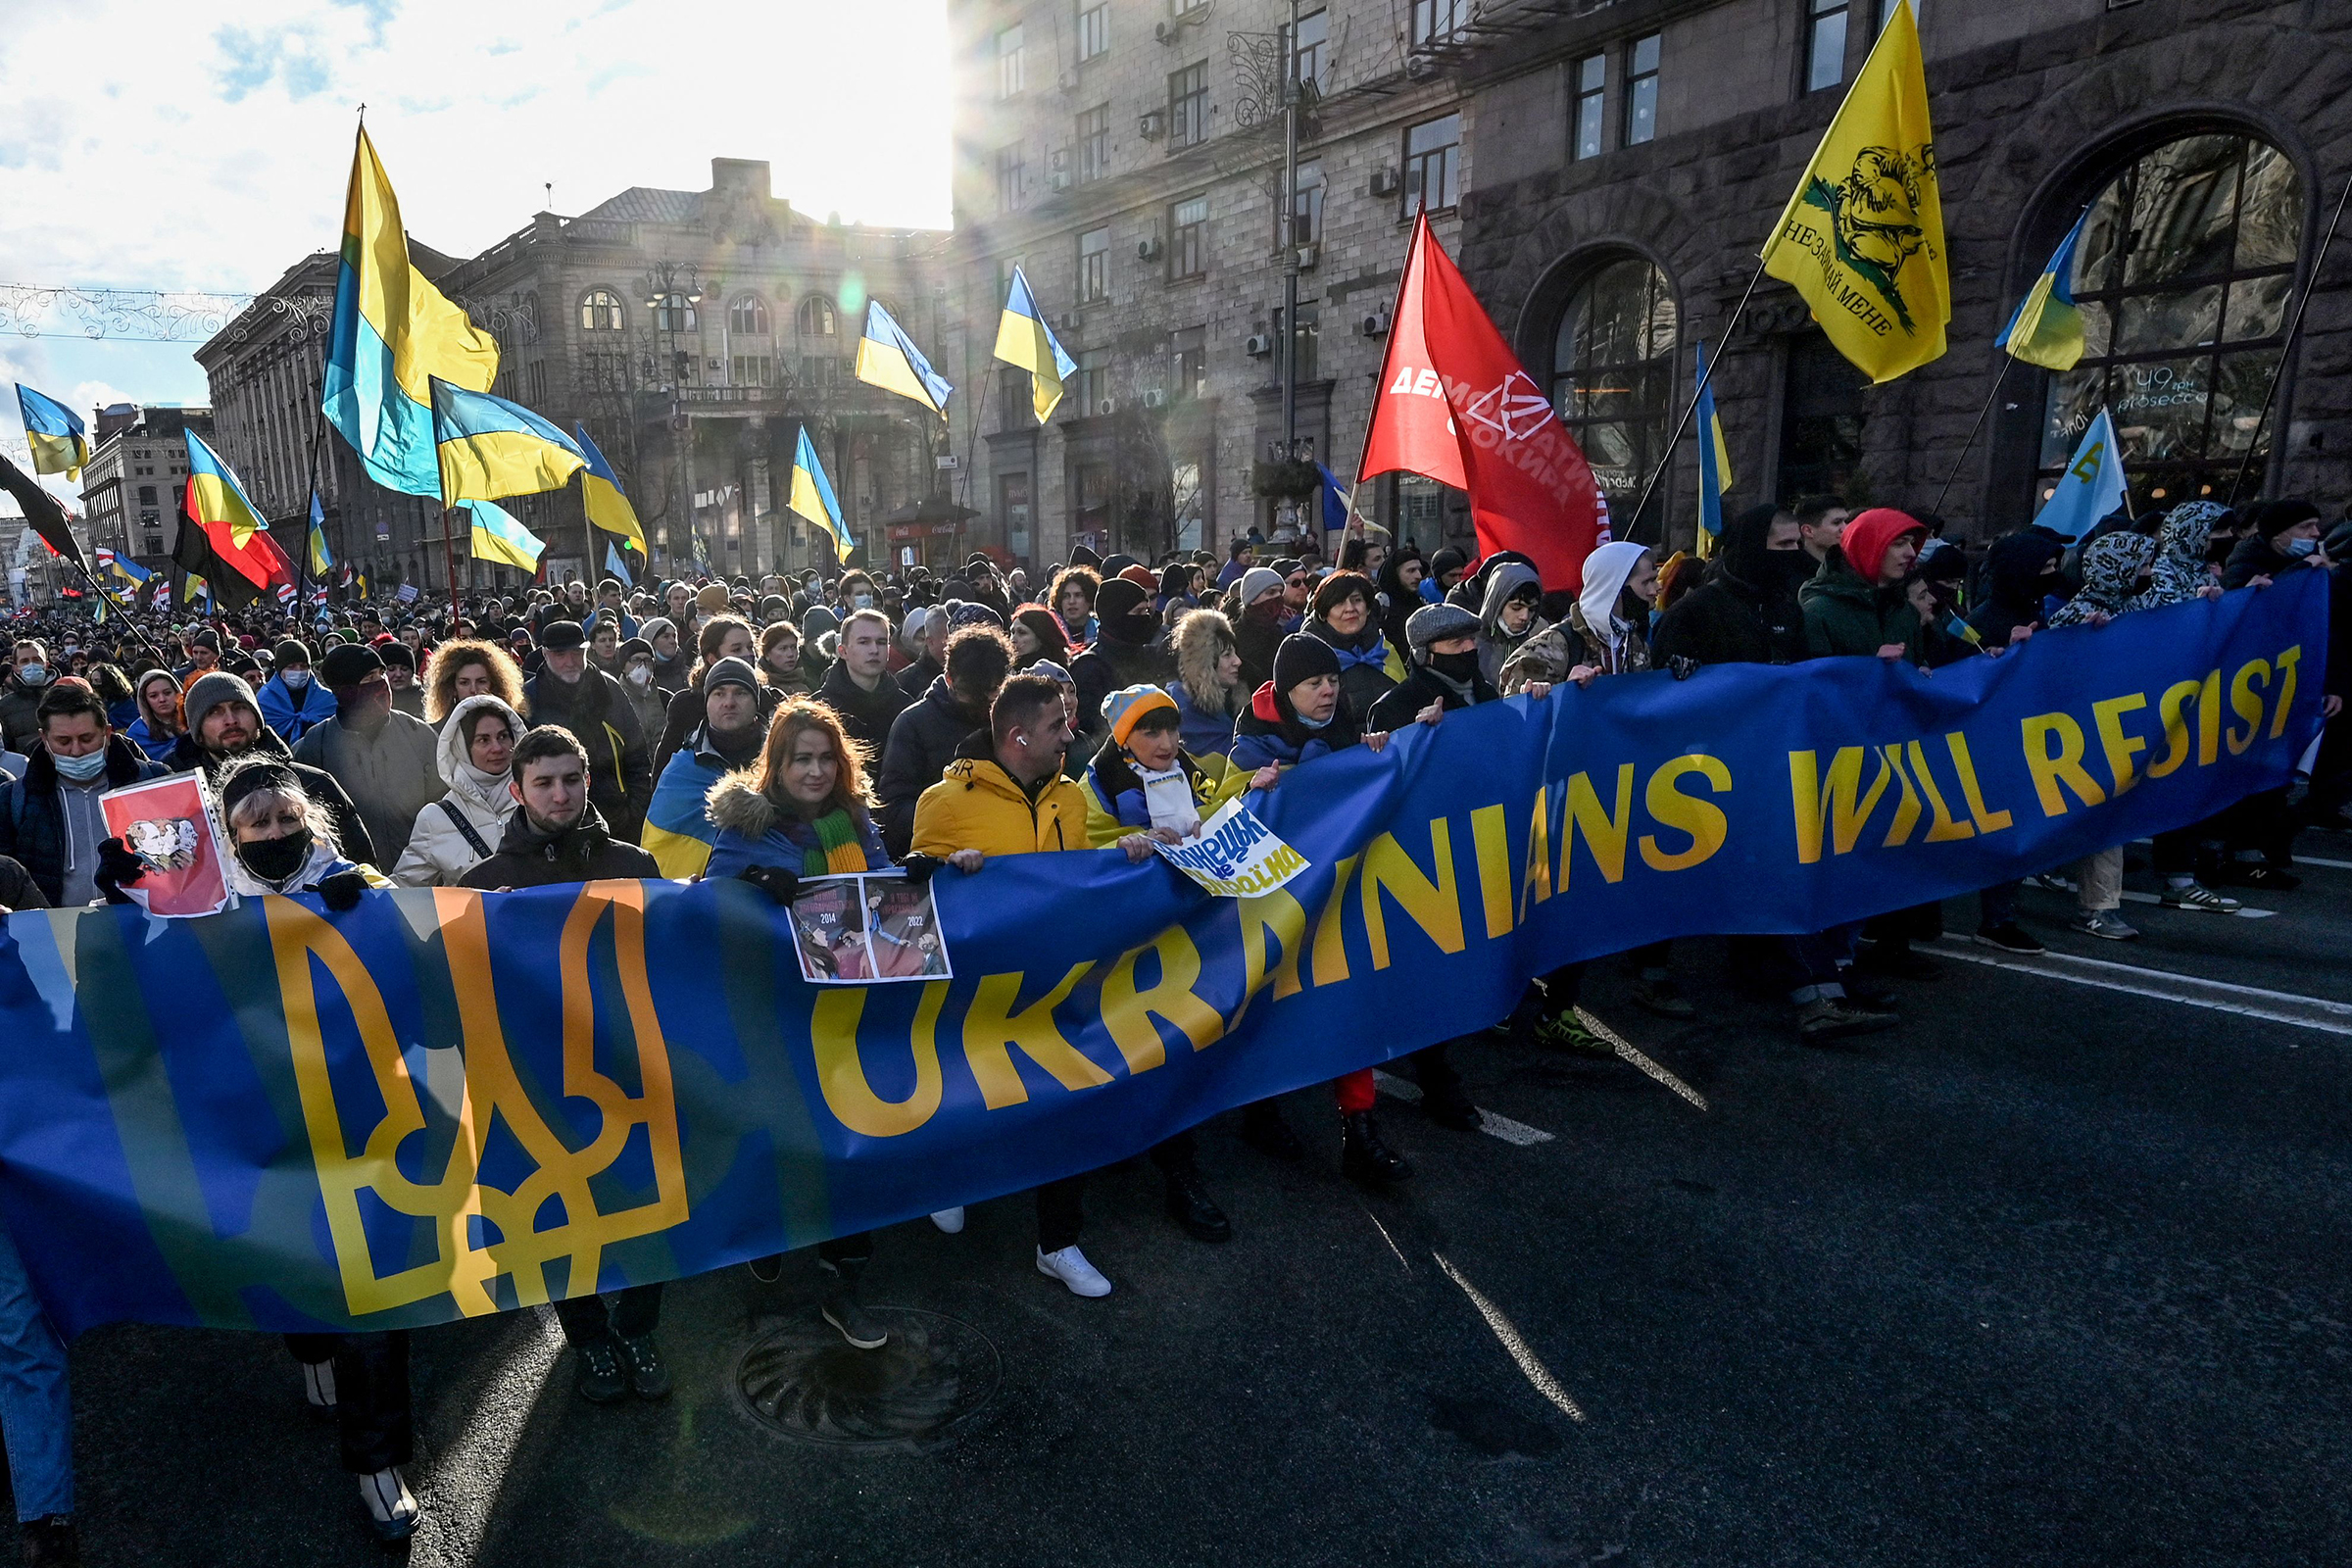 Demonstrators march behind a banner in the colors of the national flag during a rally in Kyiv in February